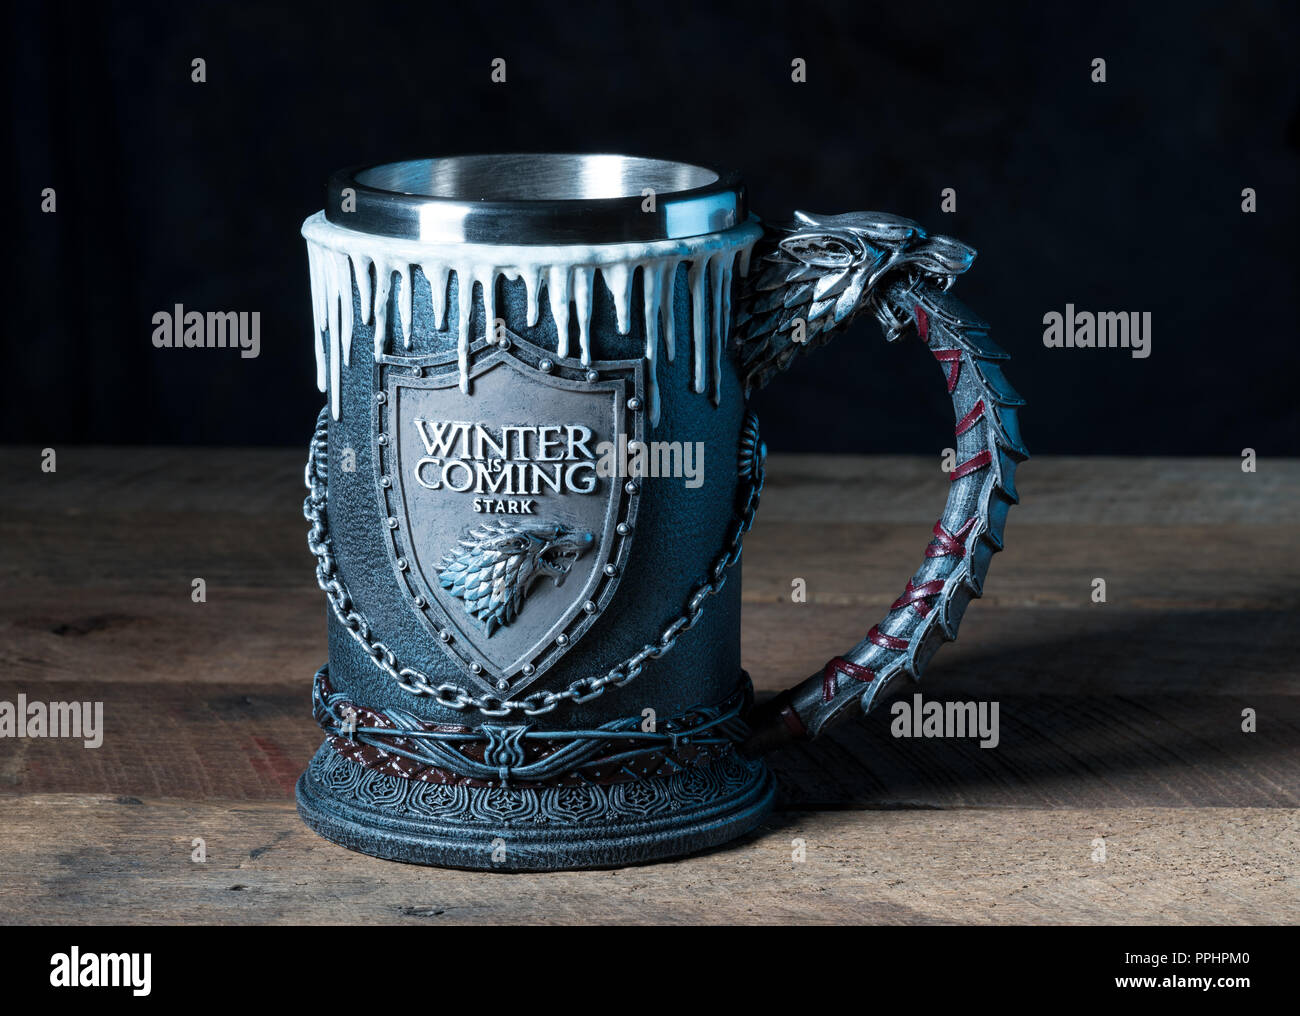 Official House Stark tankard from Game of Thrones series Stock Photo